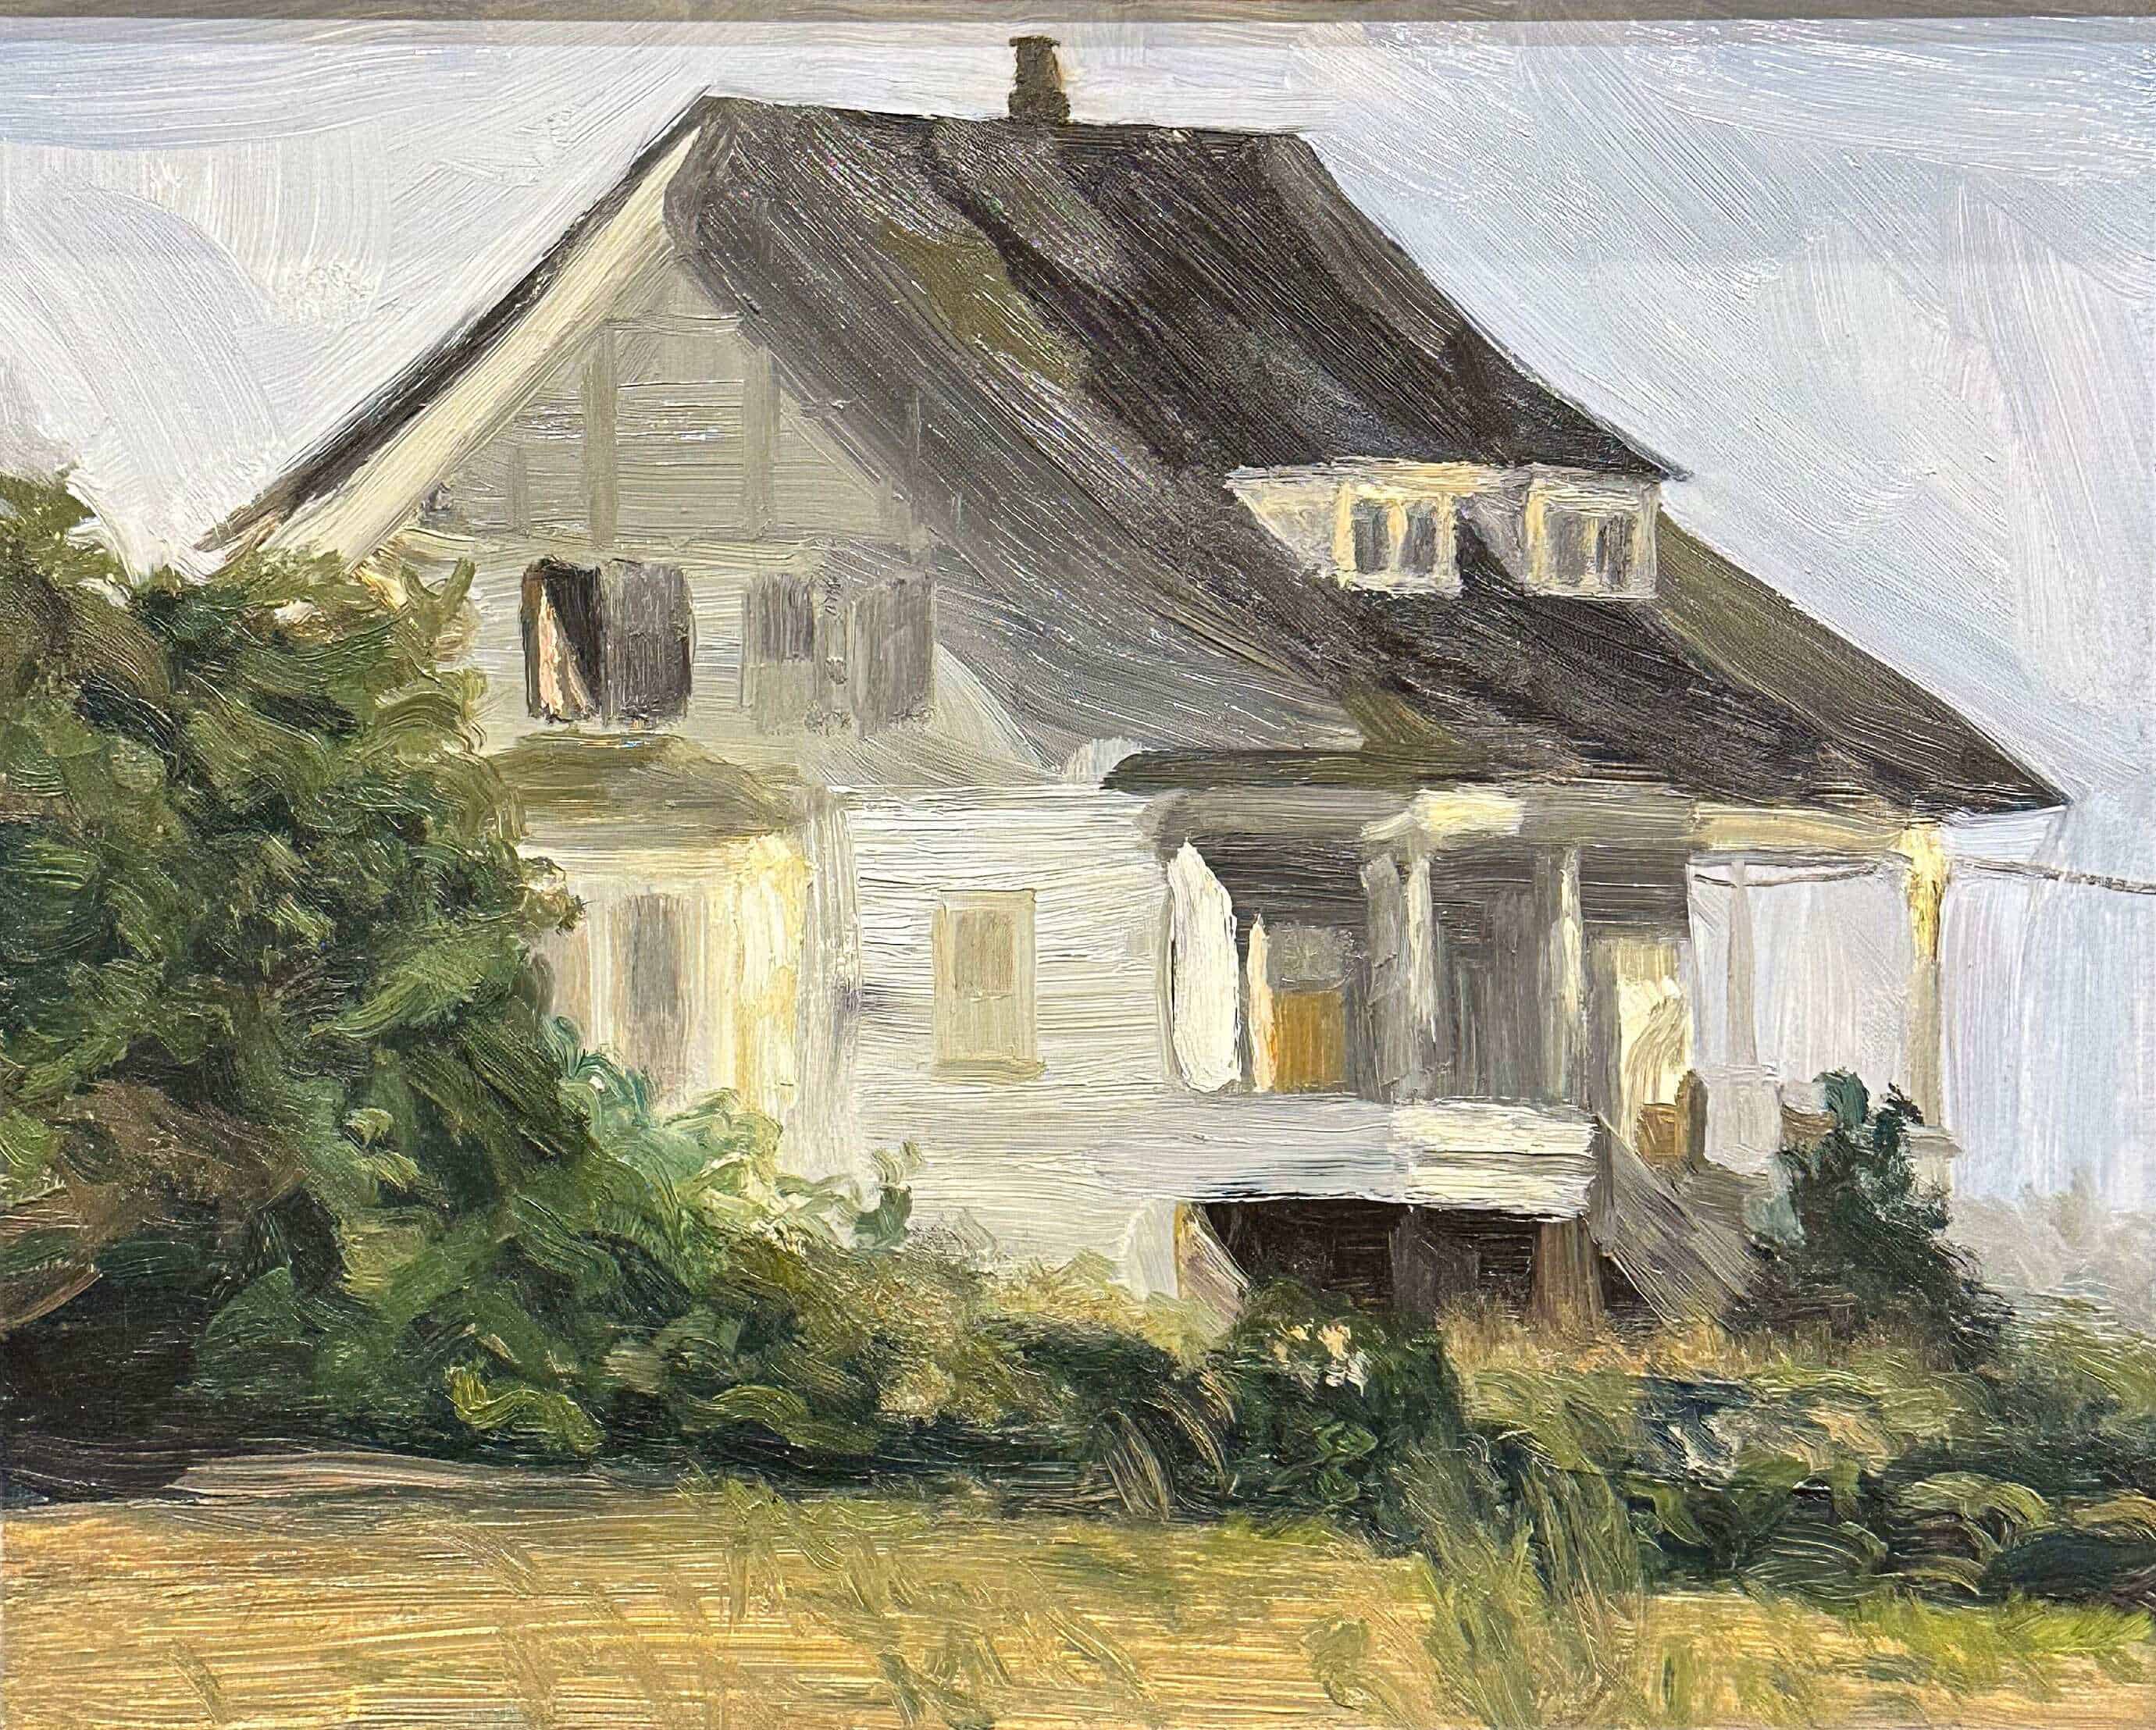 Contemporary art. Title: Abandoned House, Oil on Wood, 9 x 11 in by Canadian artist Paul Chizik.